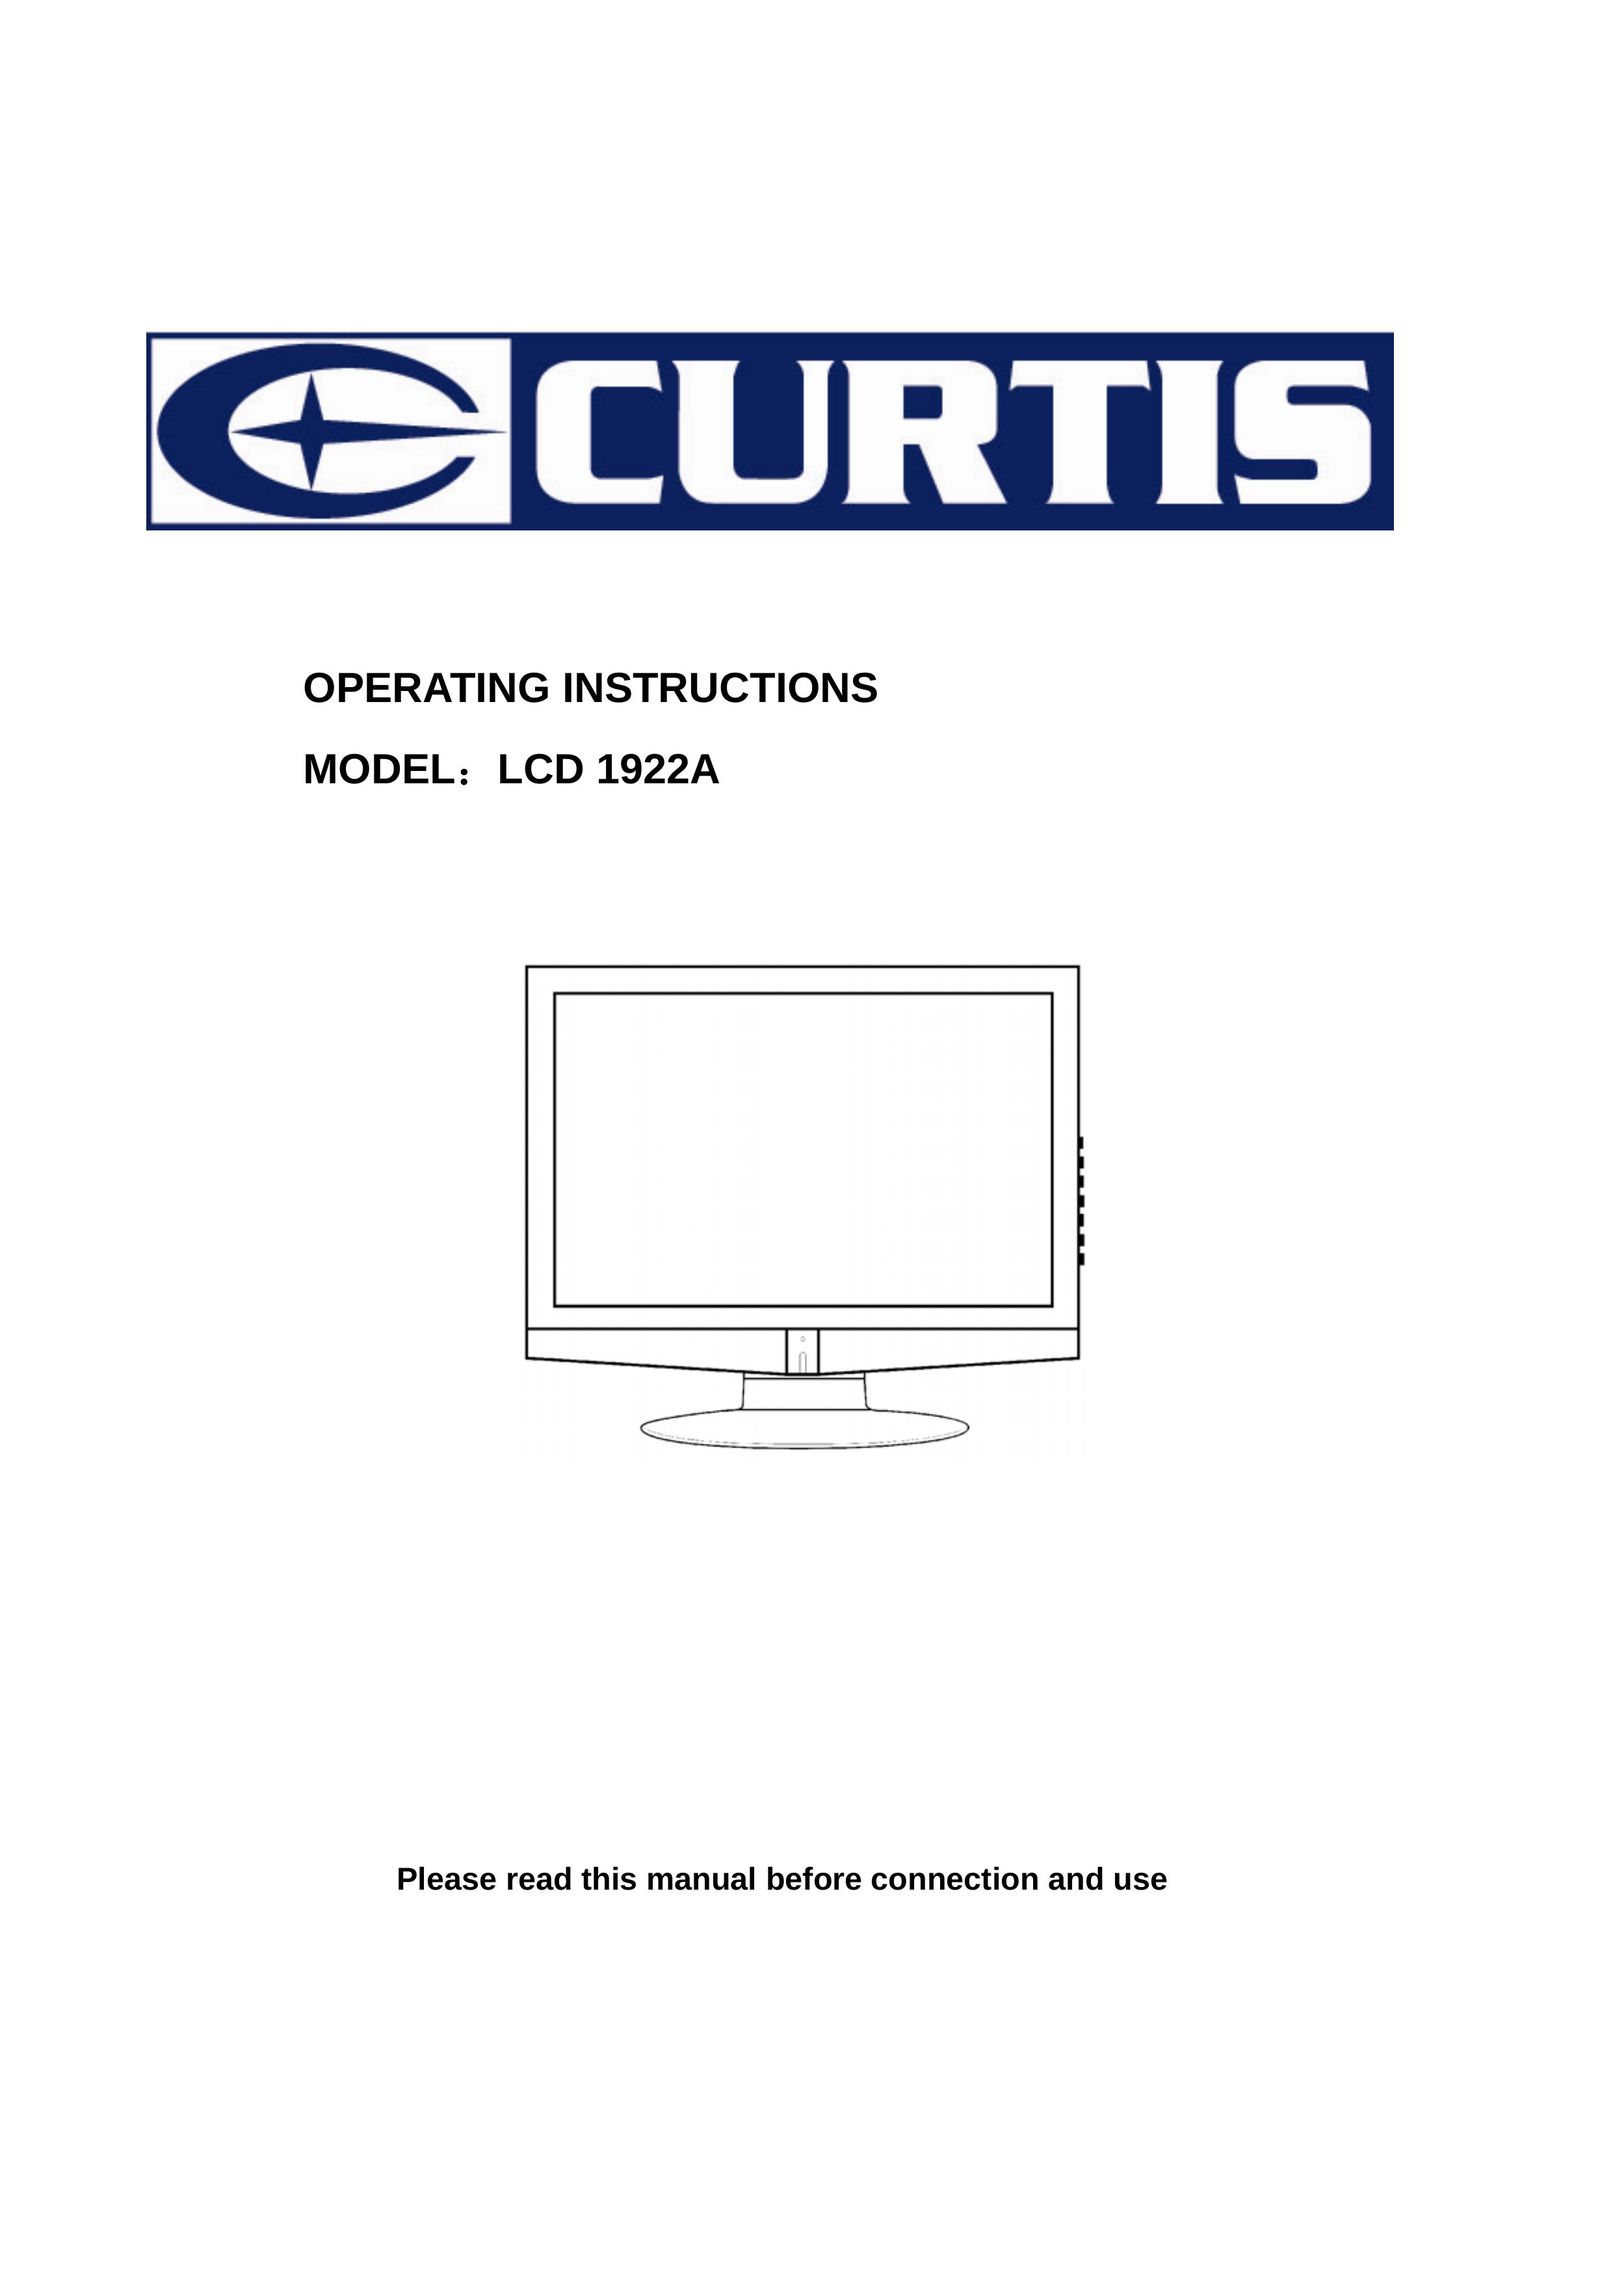 Curtis LCD 1922A Flat Panel Television User Manual